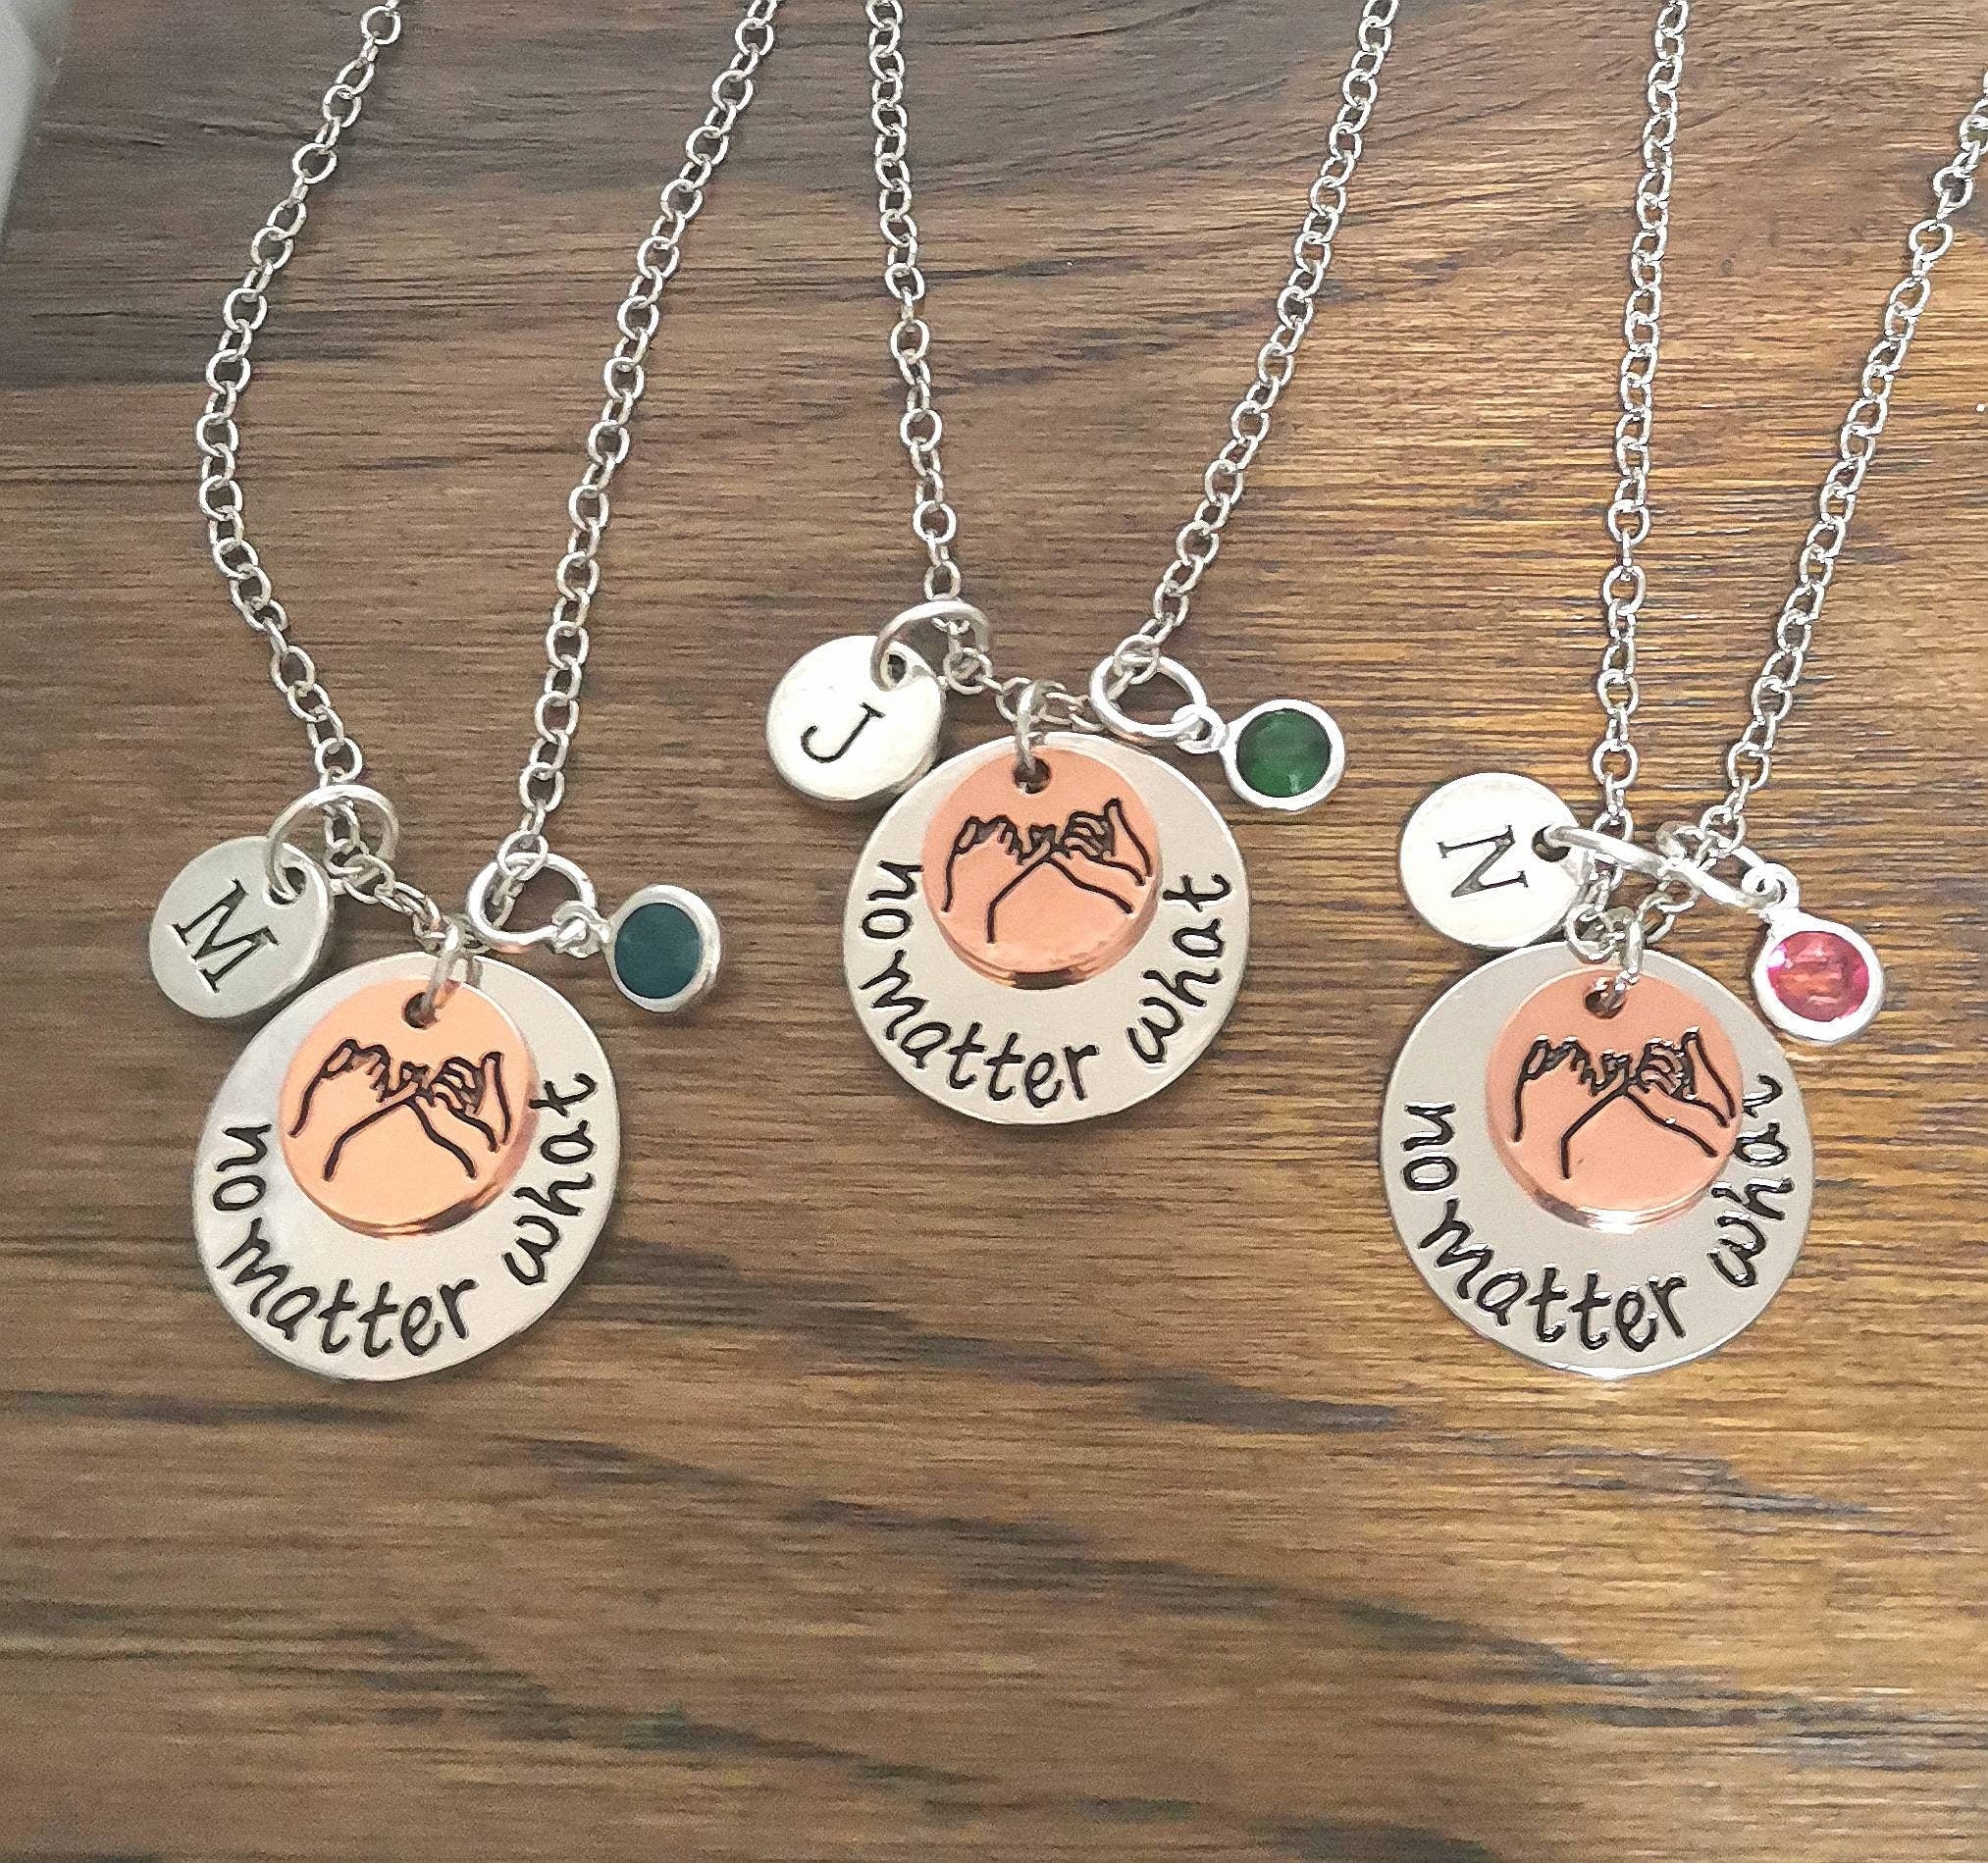 Best friend gifts, Set of 2 3 4 5 6 7 8, Bff necklace Set, Matching, Friendship, friends, Bestfriend, Best friend Necklaces, No Matter what